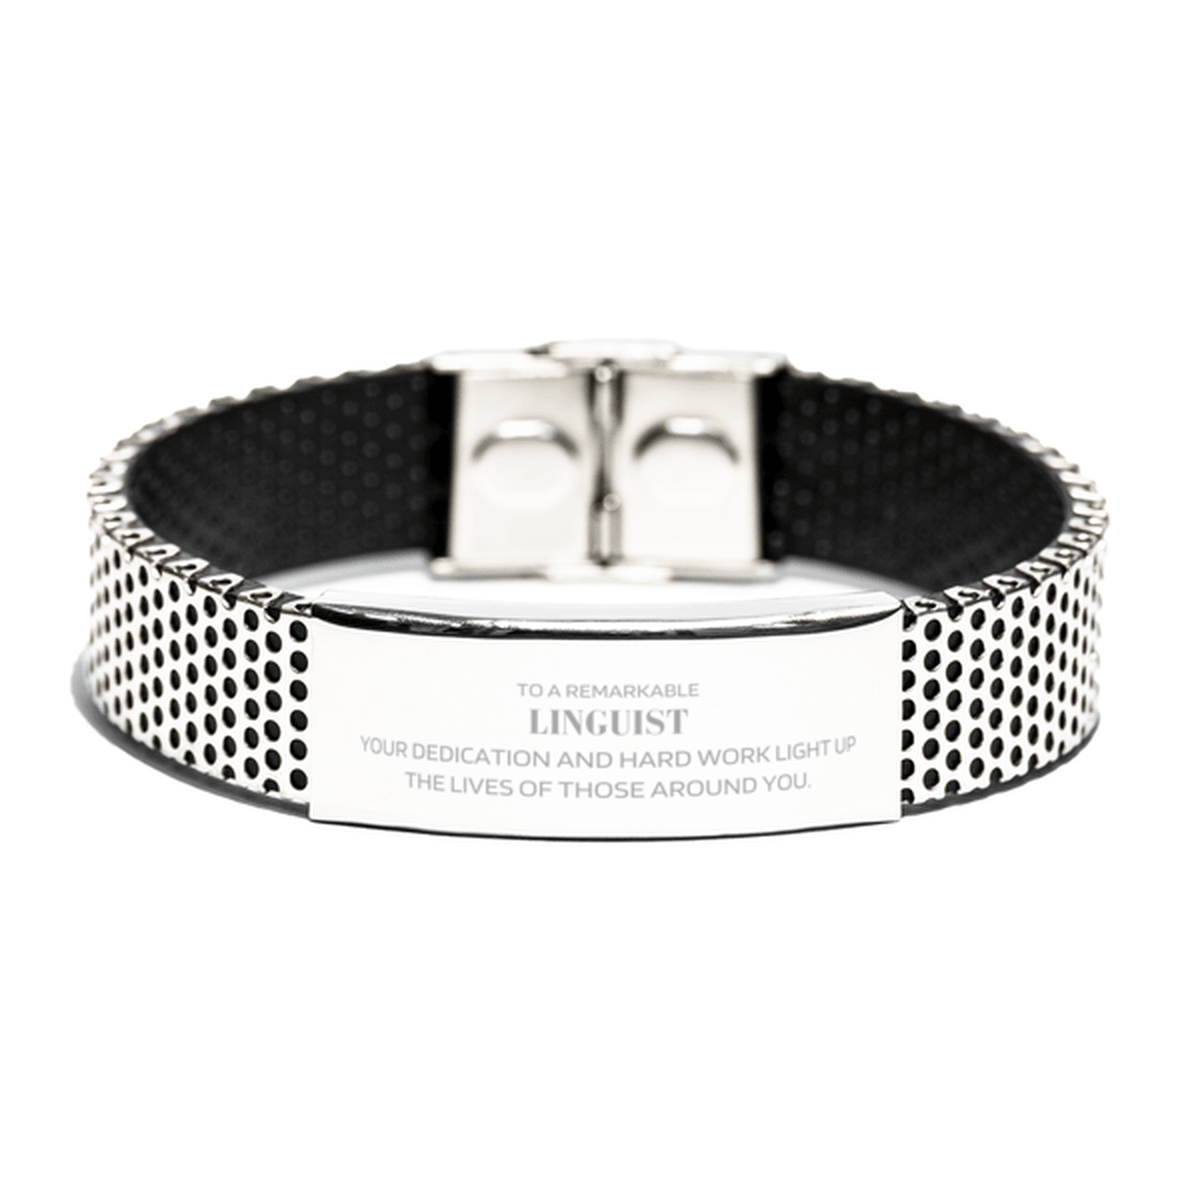 Remarkable Linguist Gifts, Your dedication and hard work, Inspirational Birthday Christmas Unique Stainless Steel Bracelet For Linguist, Coworkers, Men, Women, Friends - Mallard Moon Gift Shop